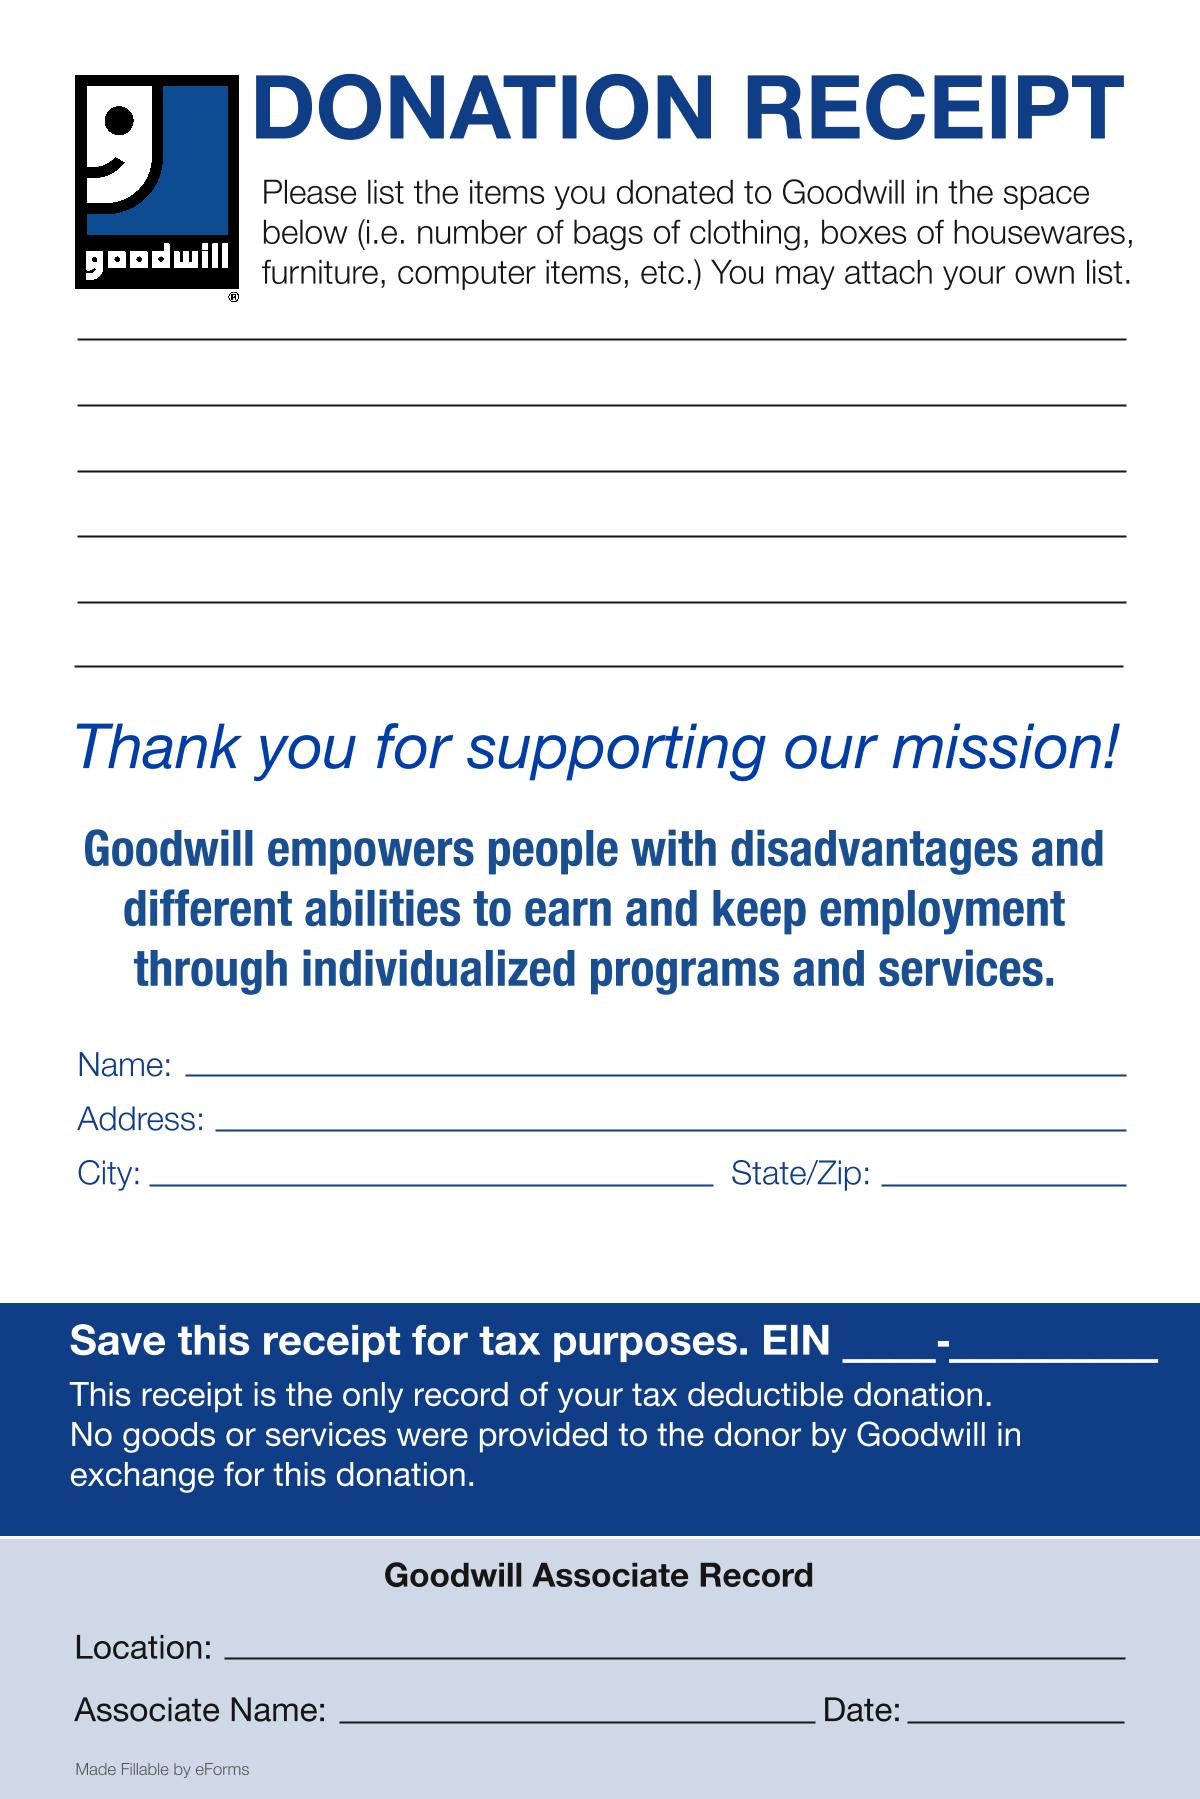 Goodwill Donation Receipt Forms